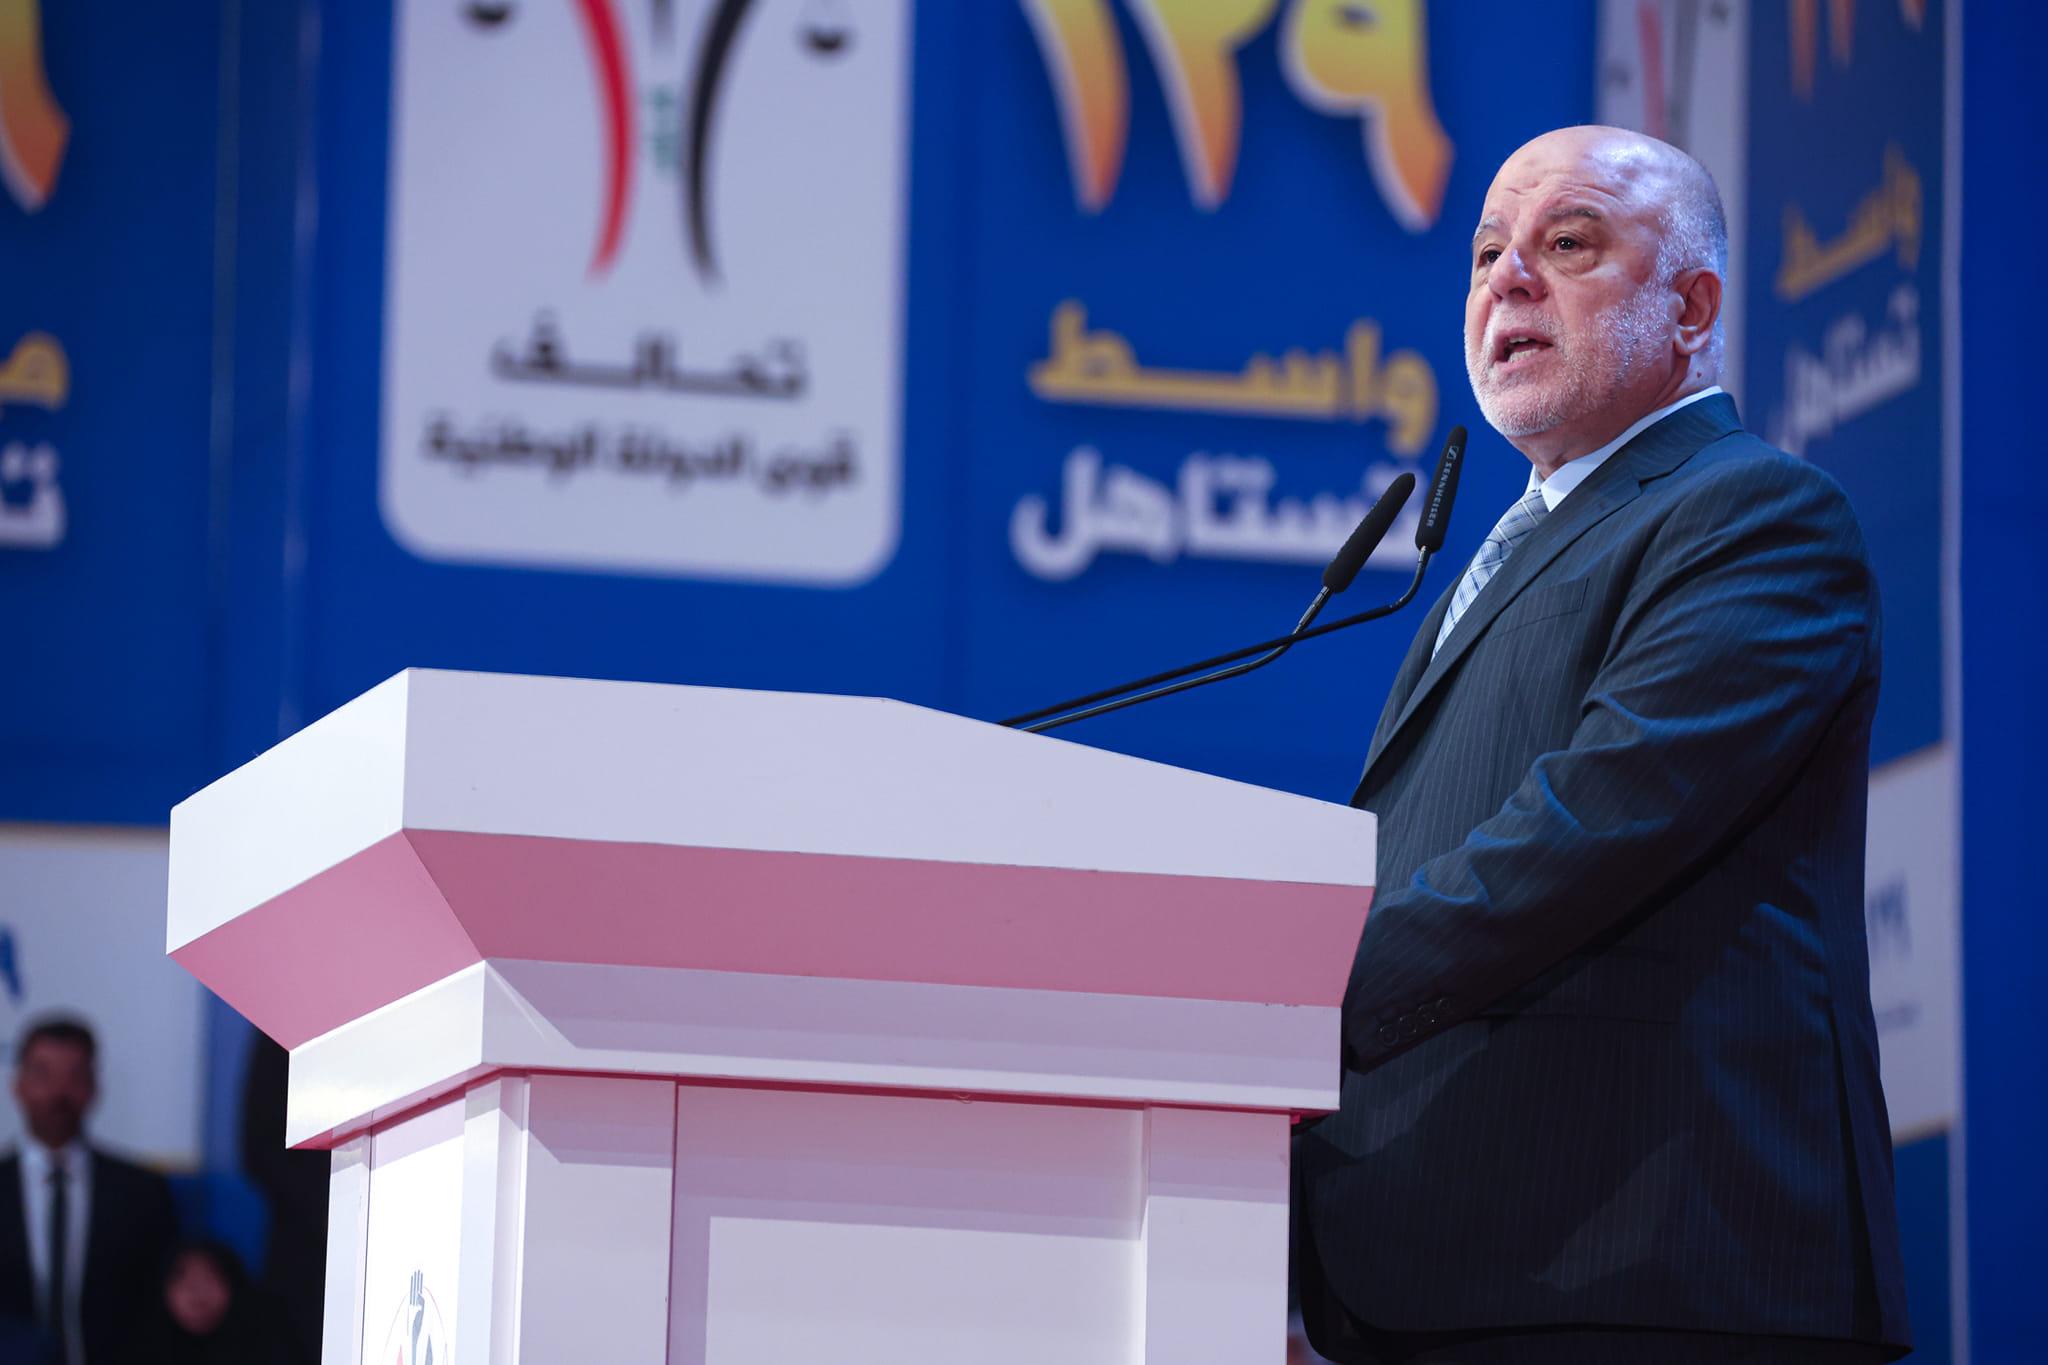 Al-Abadi: Our Alliance is centrist, believes in the democratic state, and works for it